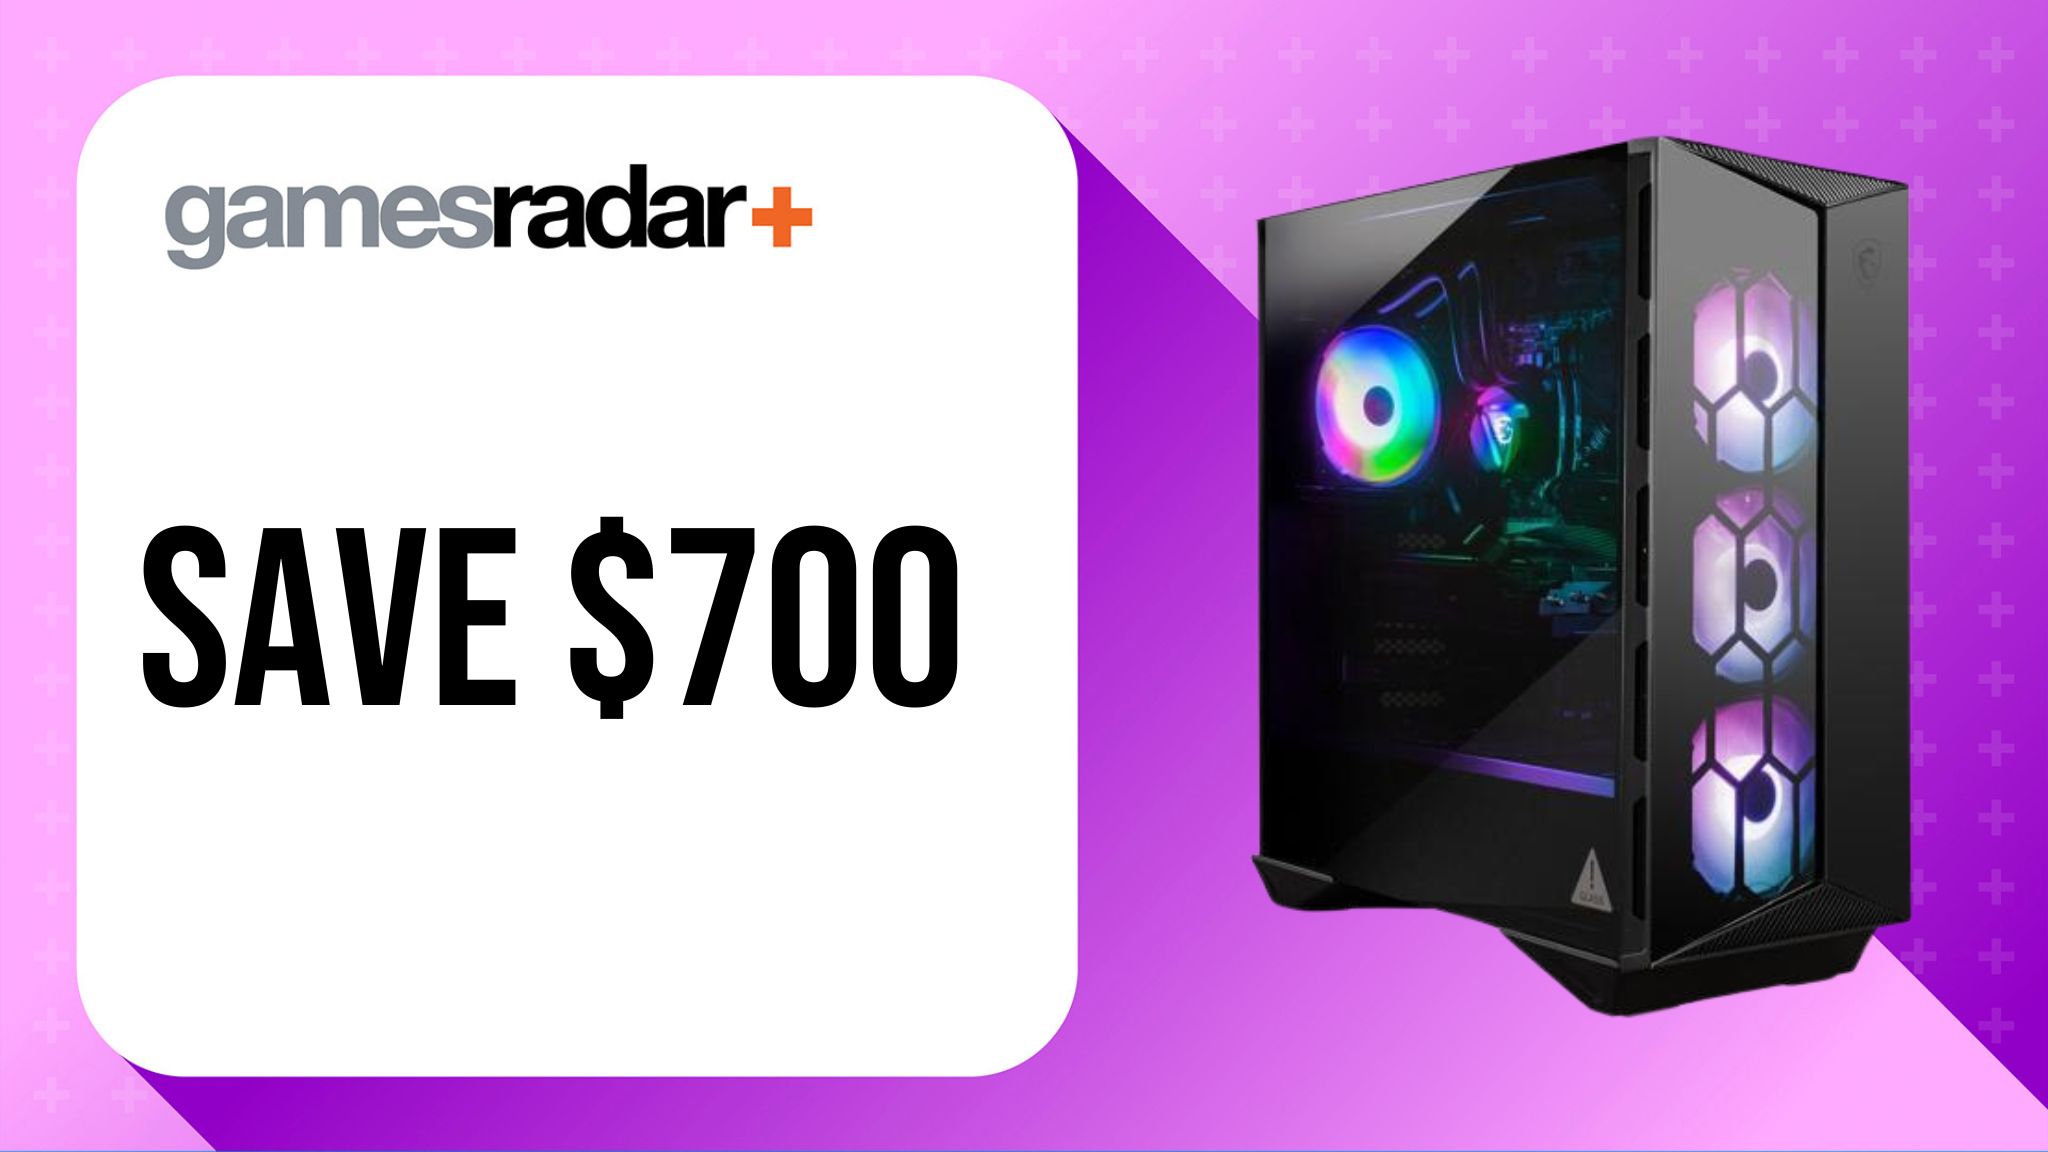 Image of MSI Aegis R offer saving $700 with purple background